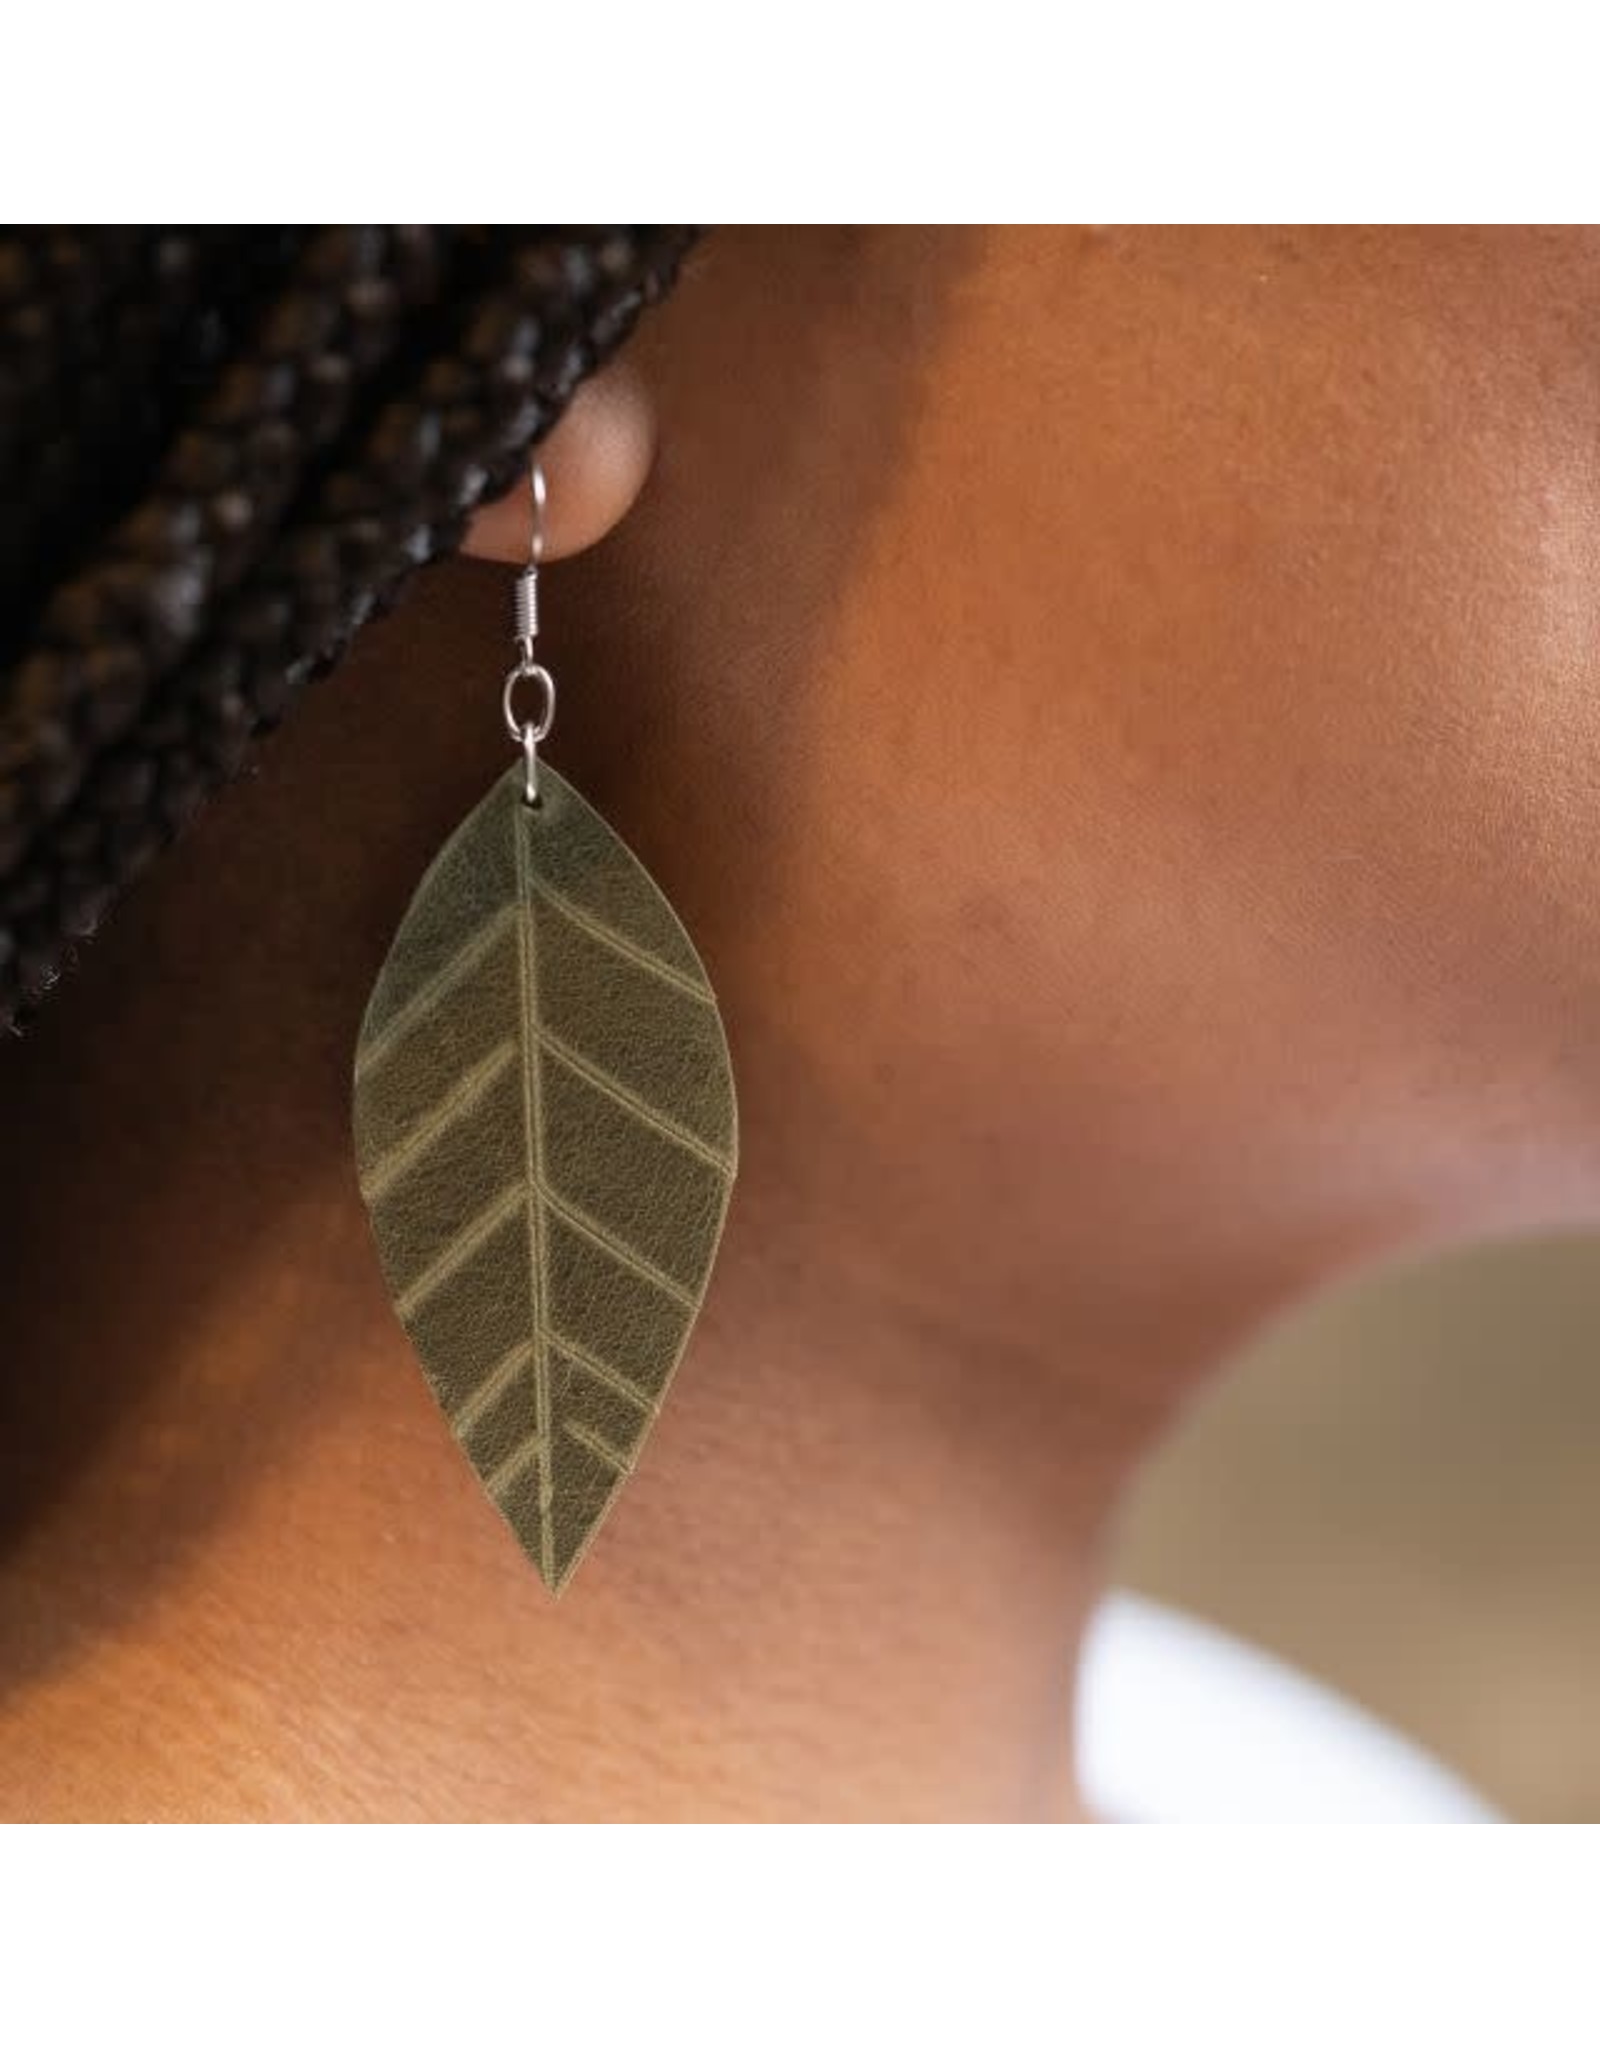 Trade roots Leather Earrings, Black, Green, Chocolate, Guatemala